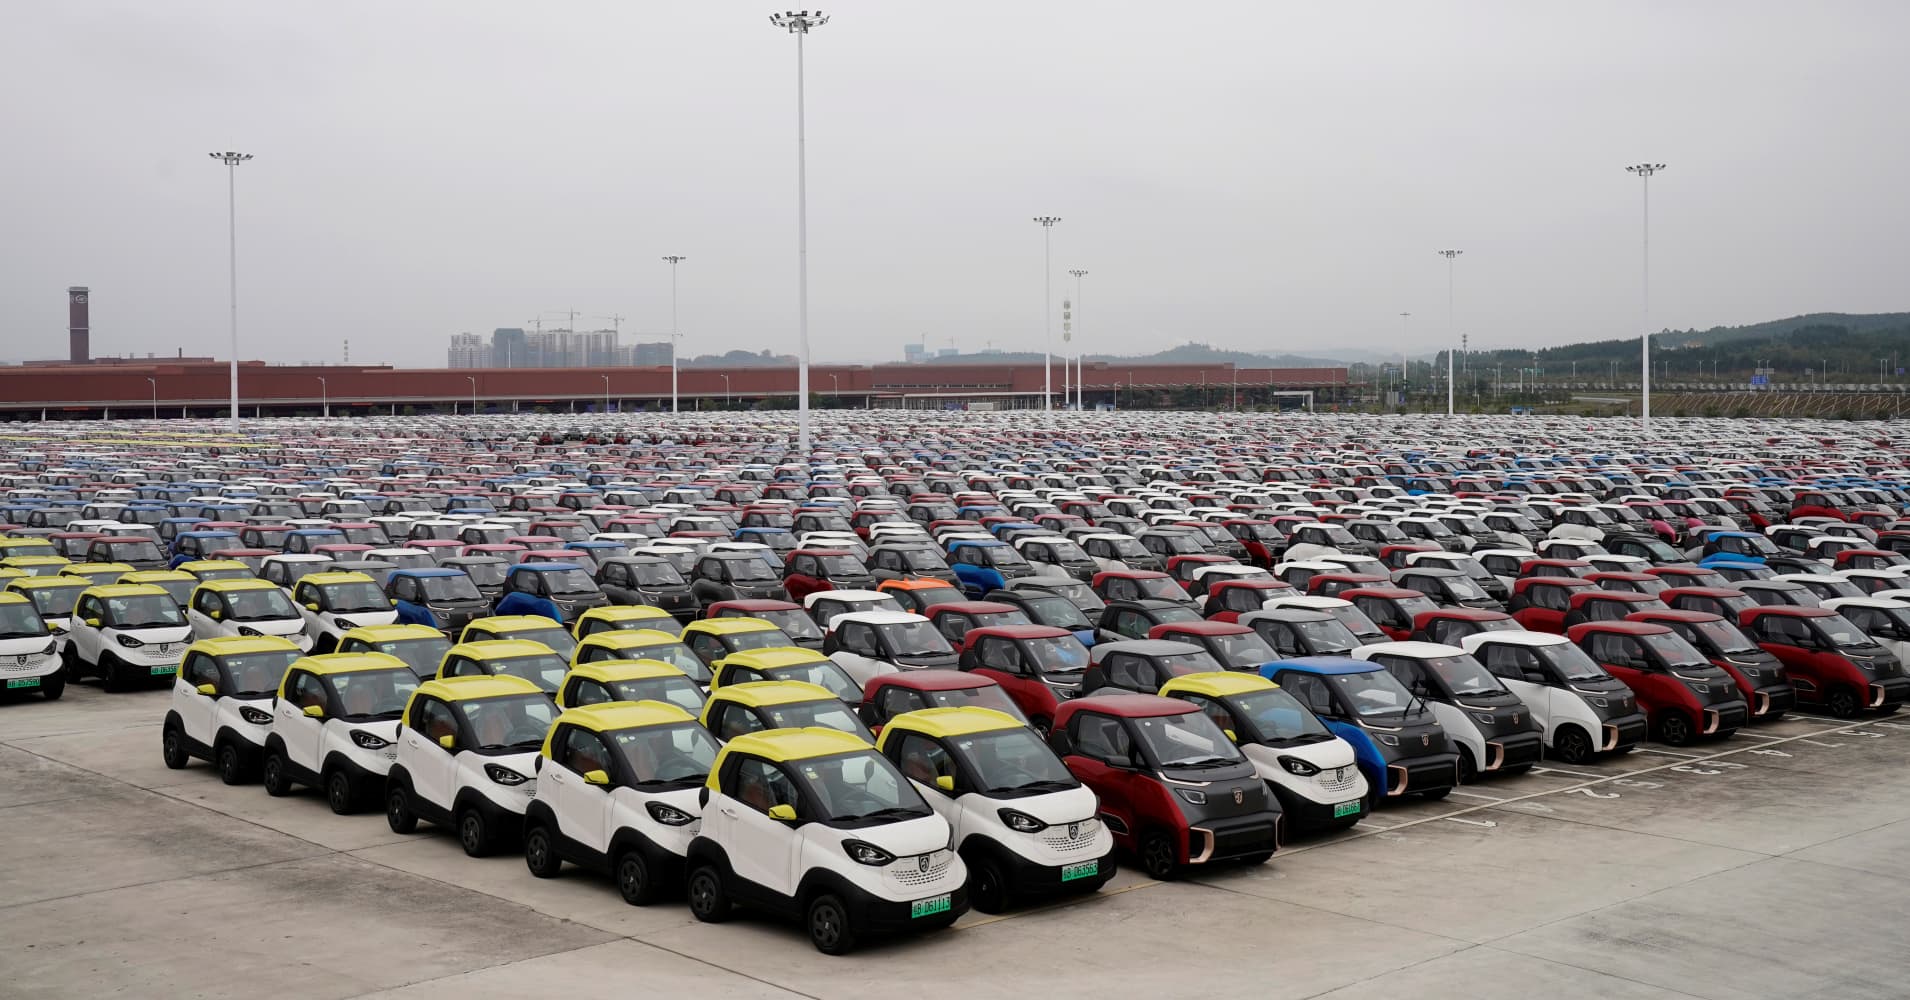 Warren Buffett-sponsored BYD sold fewer all-electric vehicles than before the pandemic